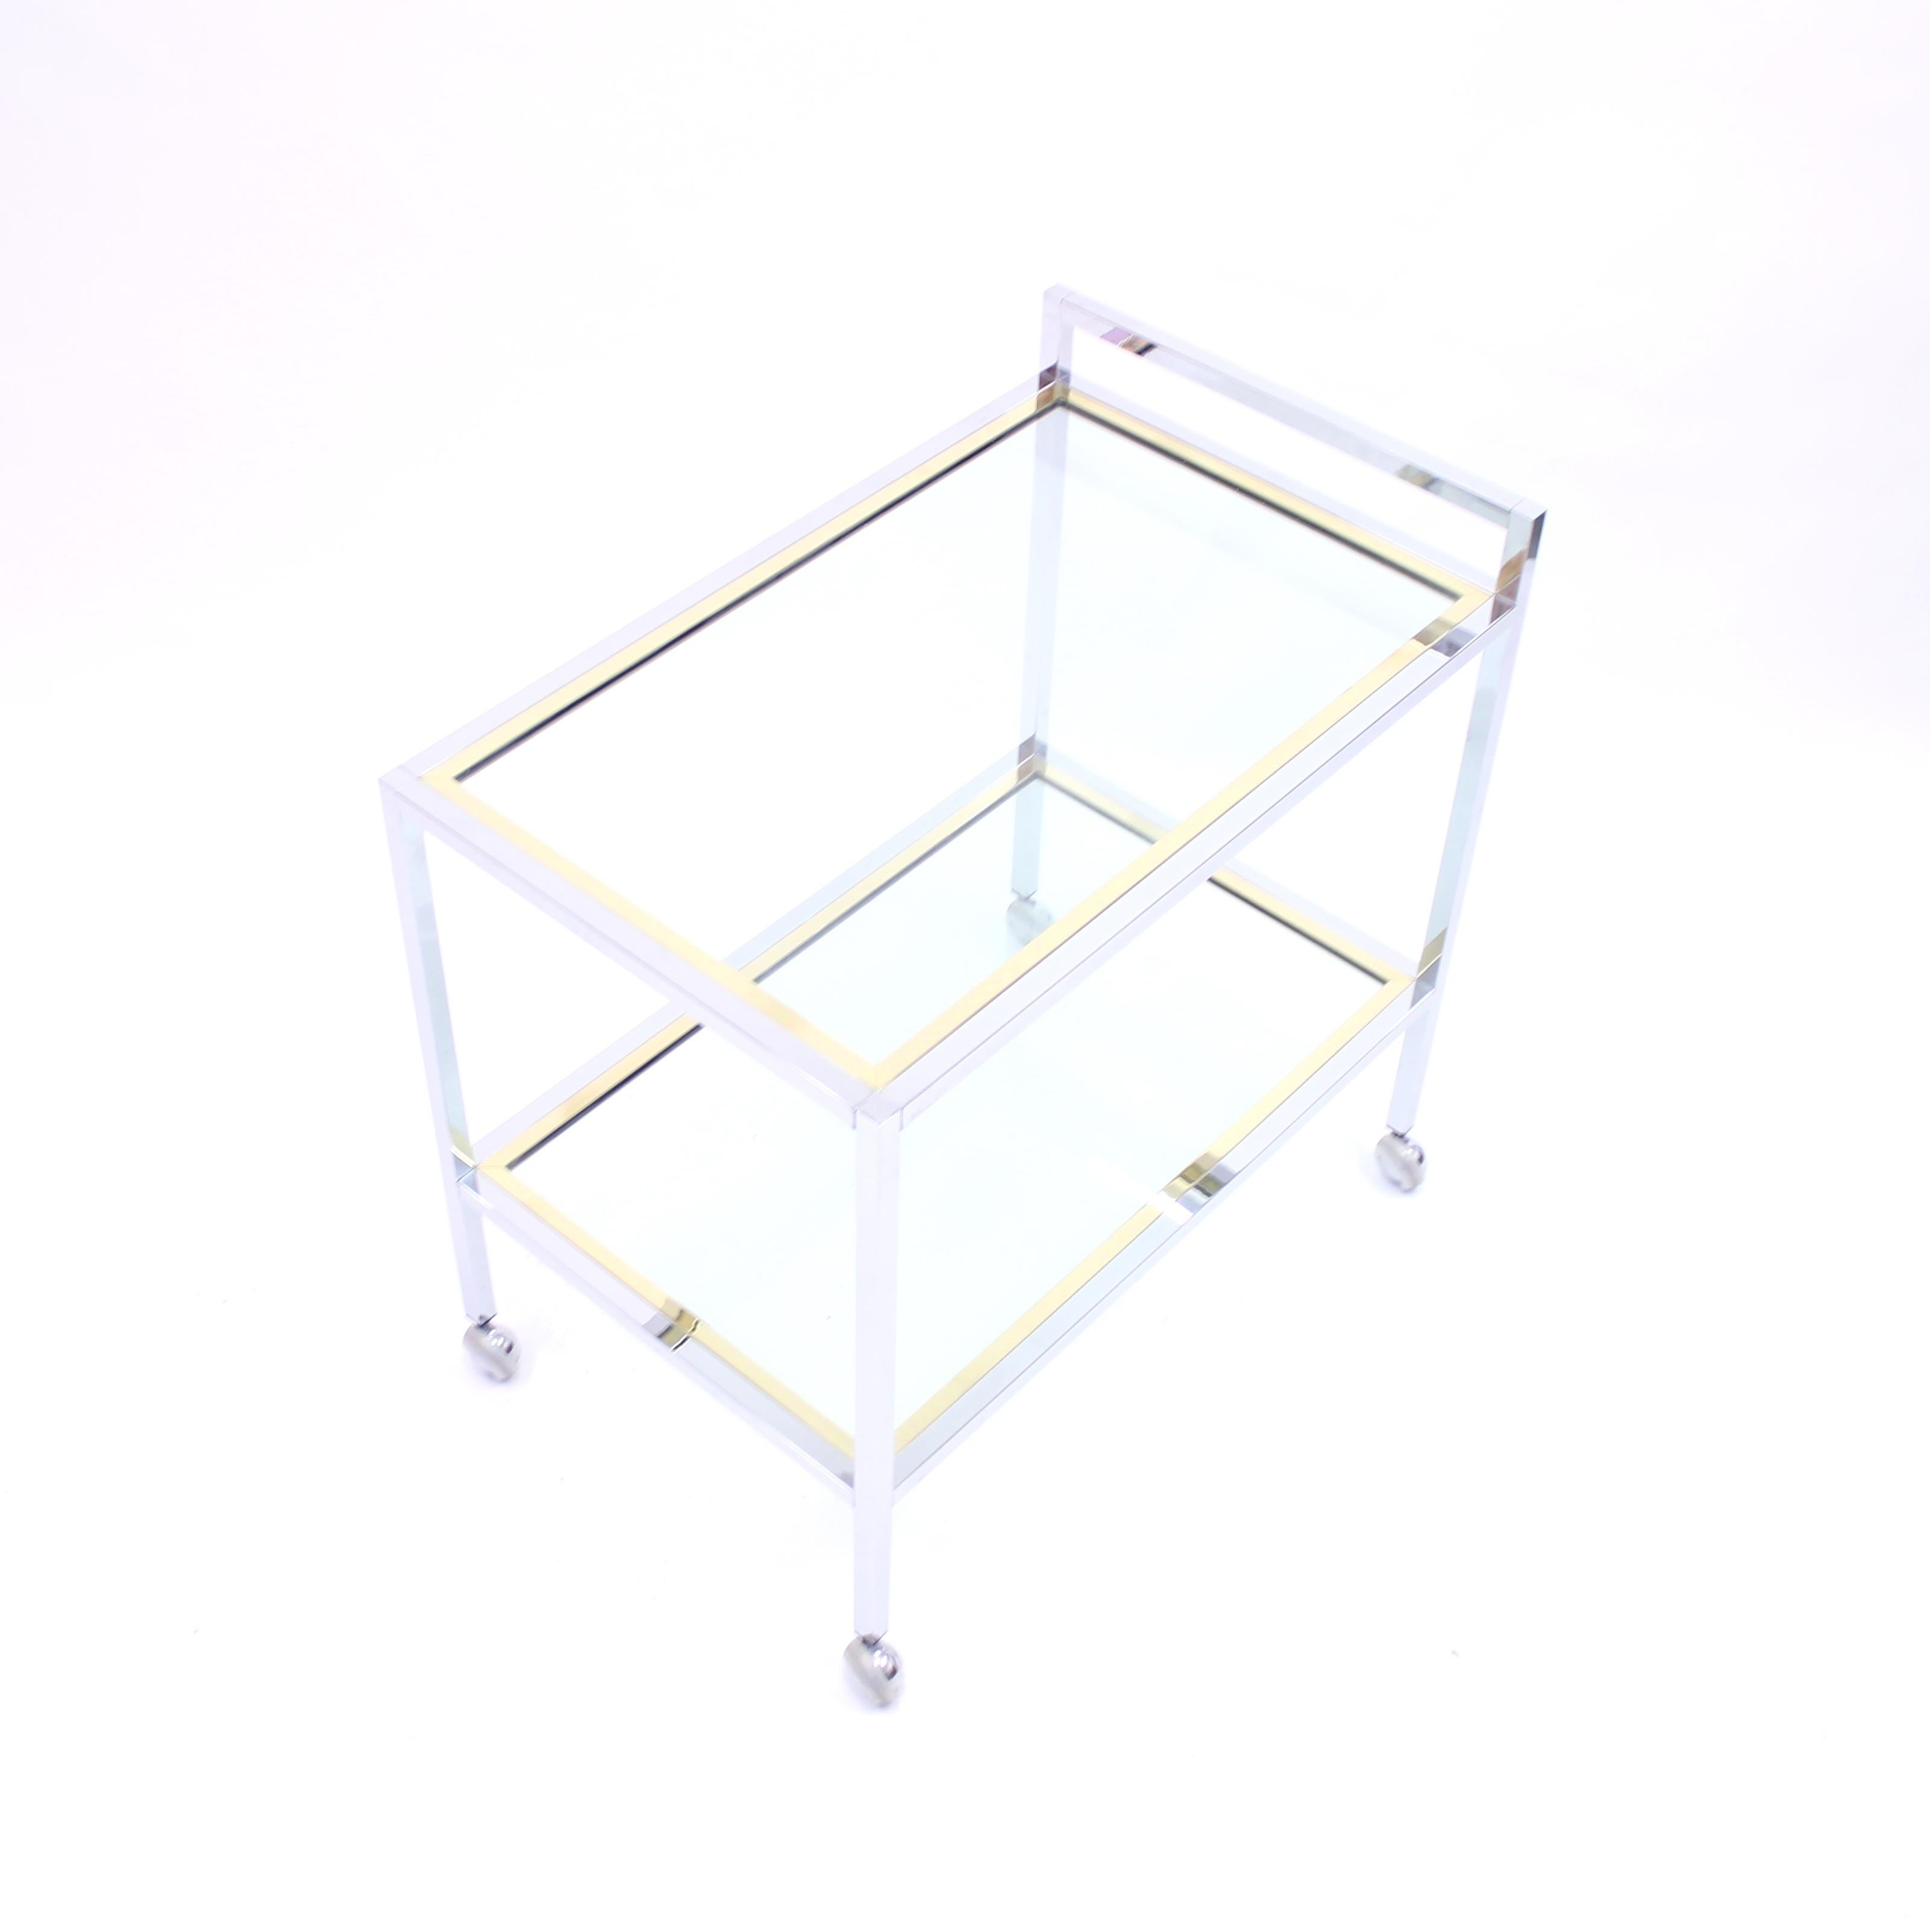 Minimalist bar trolley or cart in brass, chrome and glass from the 1970s attributed to Italian manufacturer Romeo Rega. Very good condition with hardly any ware.